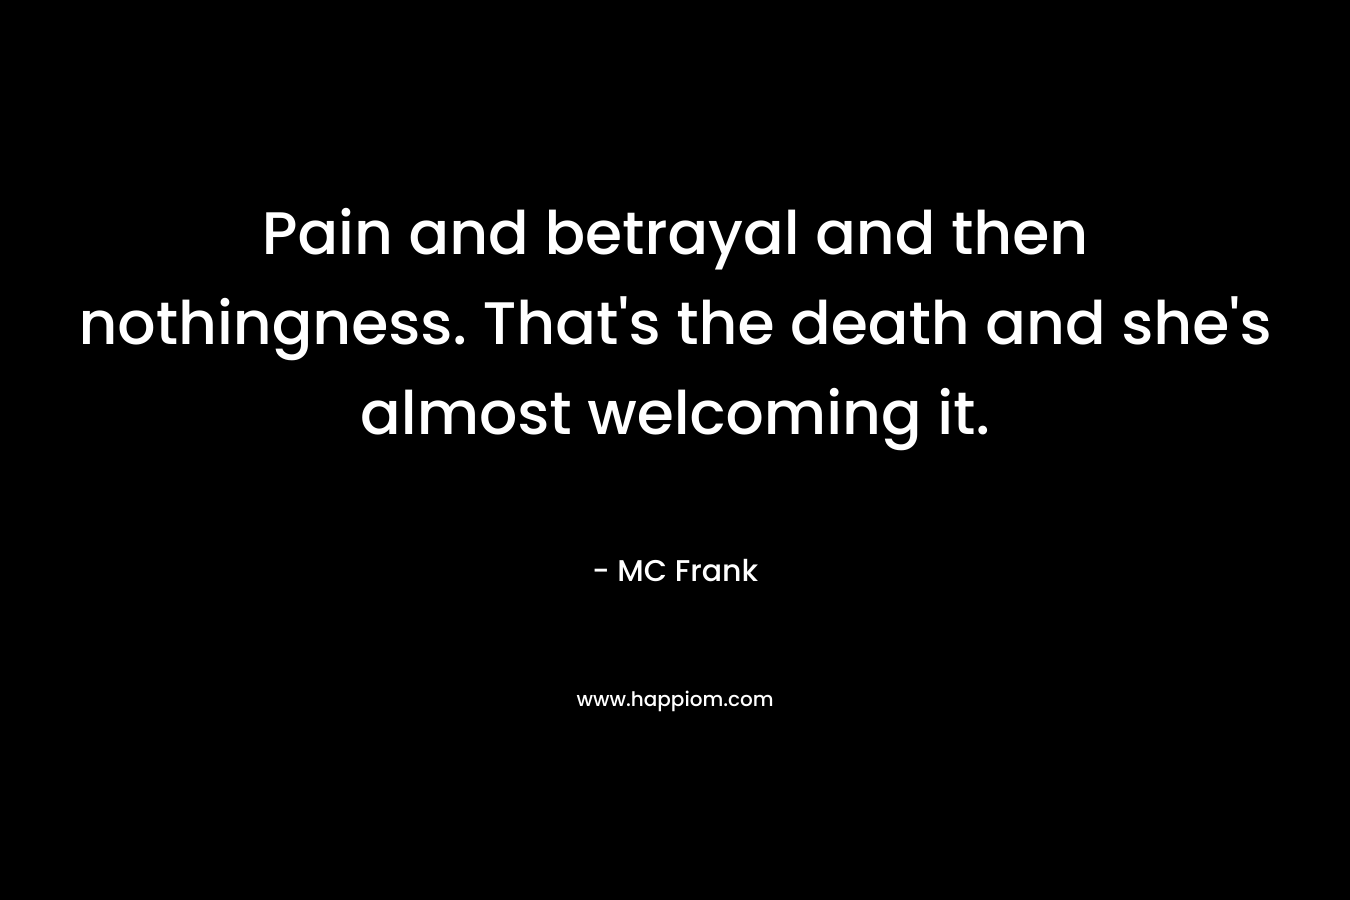 Pain and betrayal and then nothingness. That’s the death and she’s almost welcoming it. – MC Frank